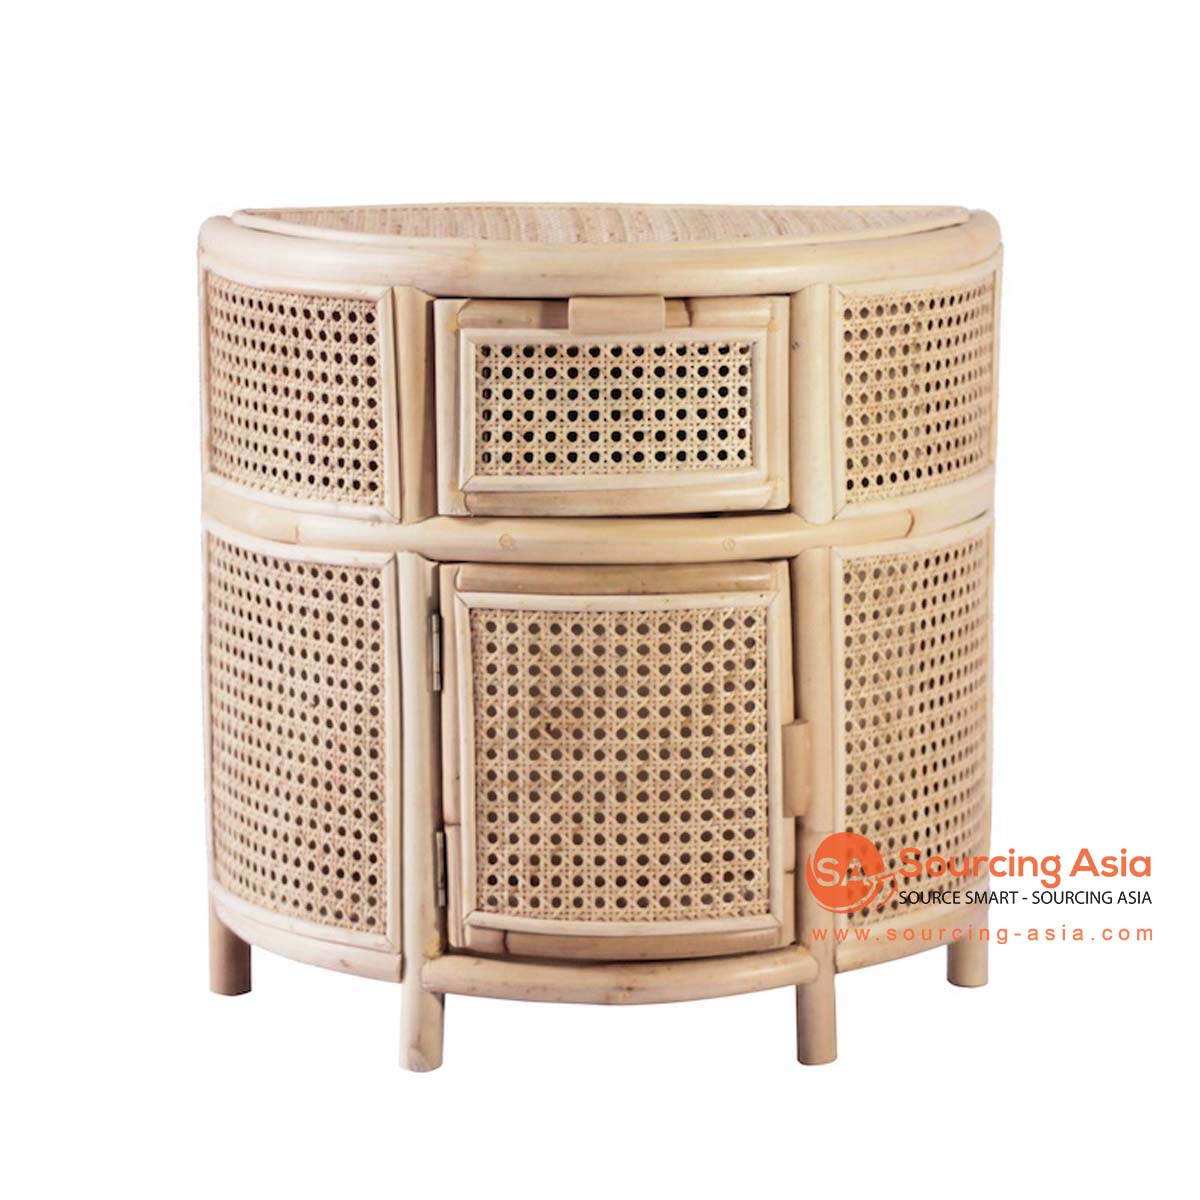 SHL500 NATURAL RATTAN BEDSIDE TABLE WITH ONE DOOR AND SHELF